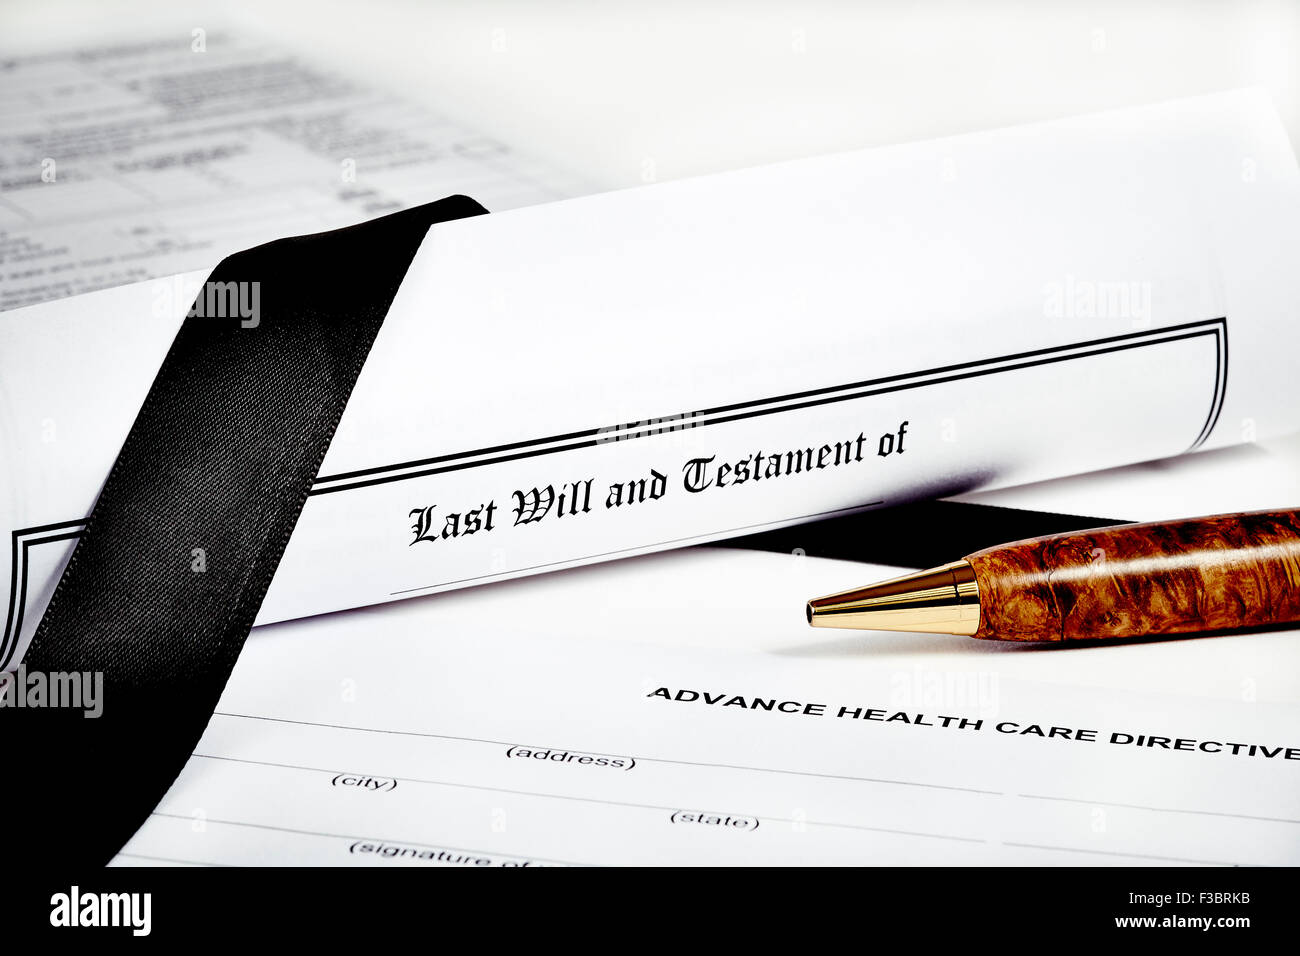 Last Will and Testament rolled up with advance health care directive and tax return in background isolated on white with a pen a Stock Photo